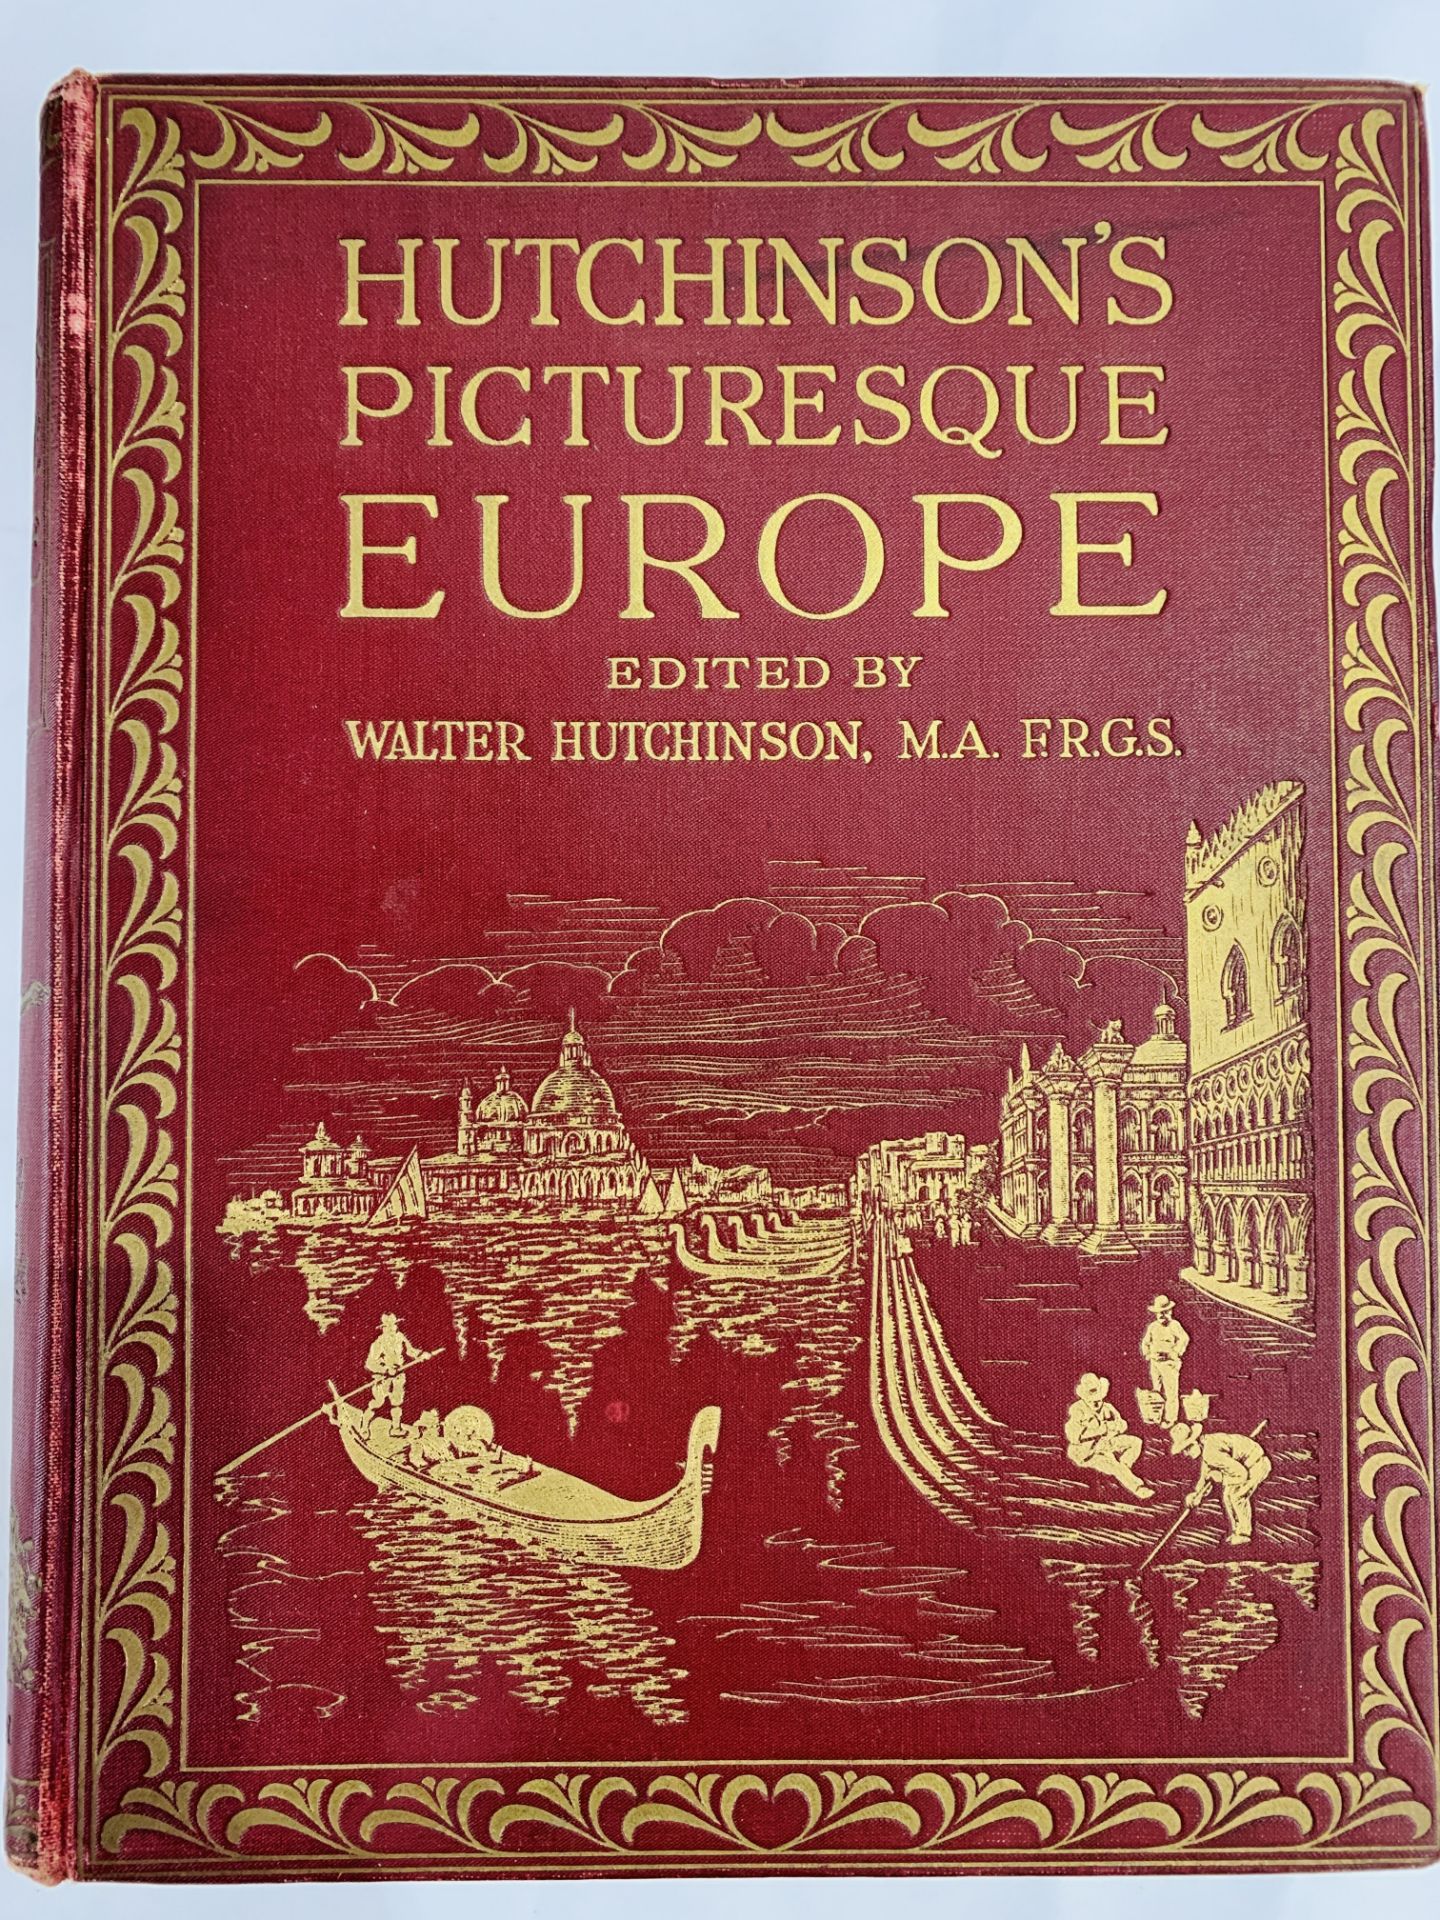 Hutchinson's Picturesque Europe, 3 volumes circa 1910-1920 - Image 2 of 4